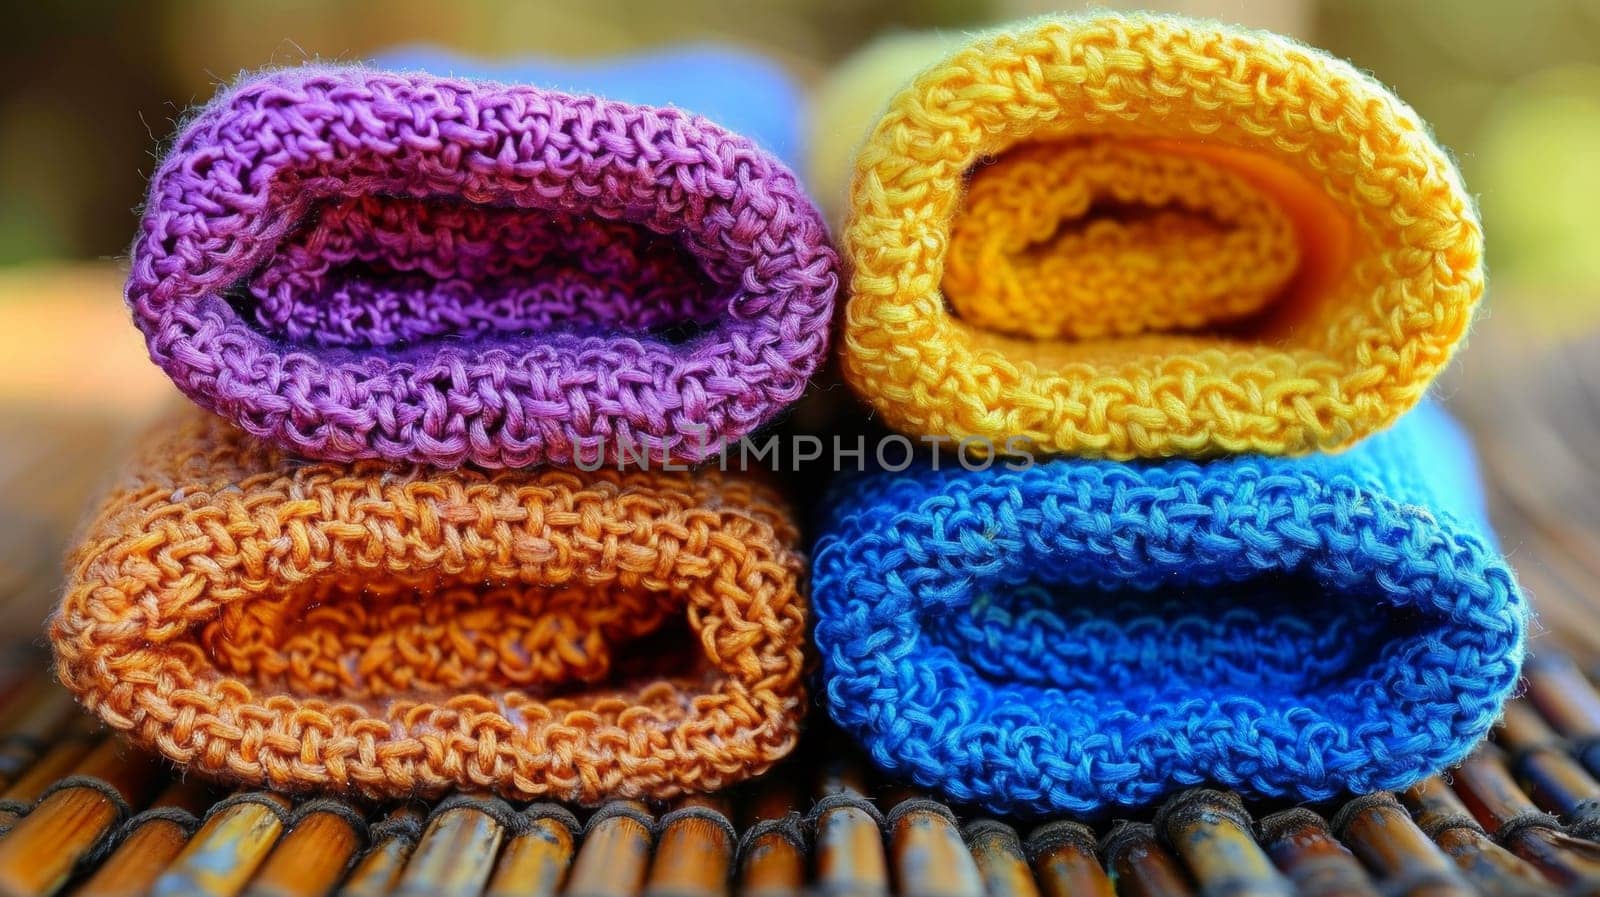 Three colorful towels are stacked on a bamboo mat